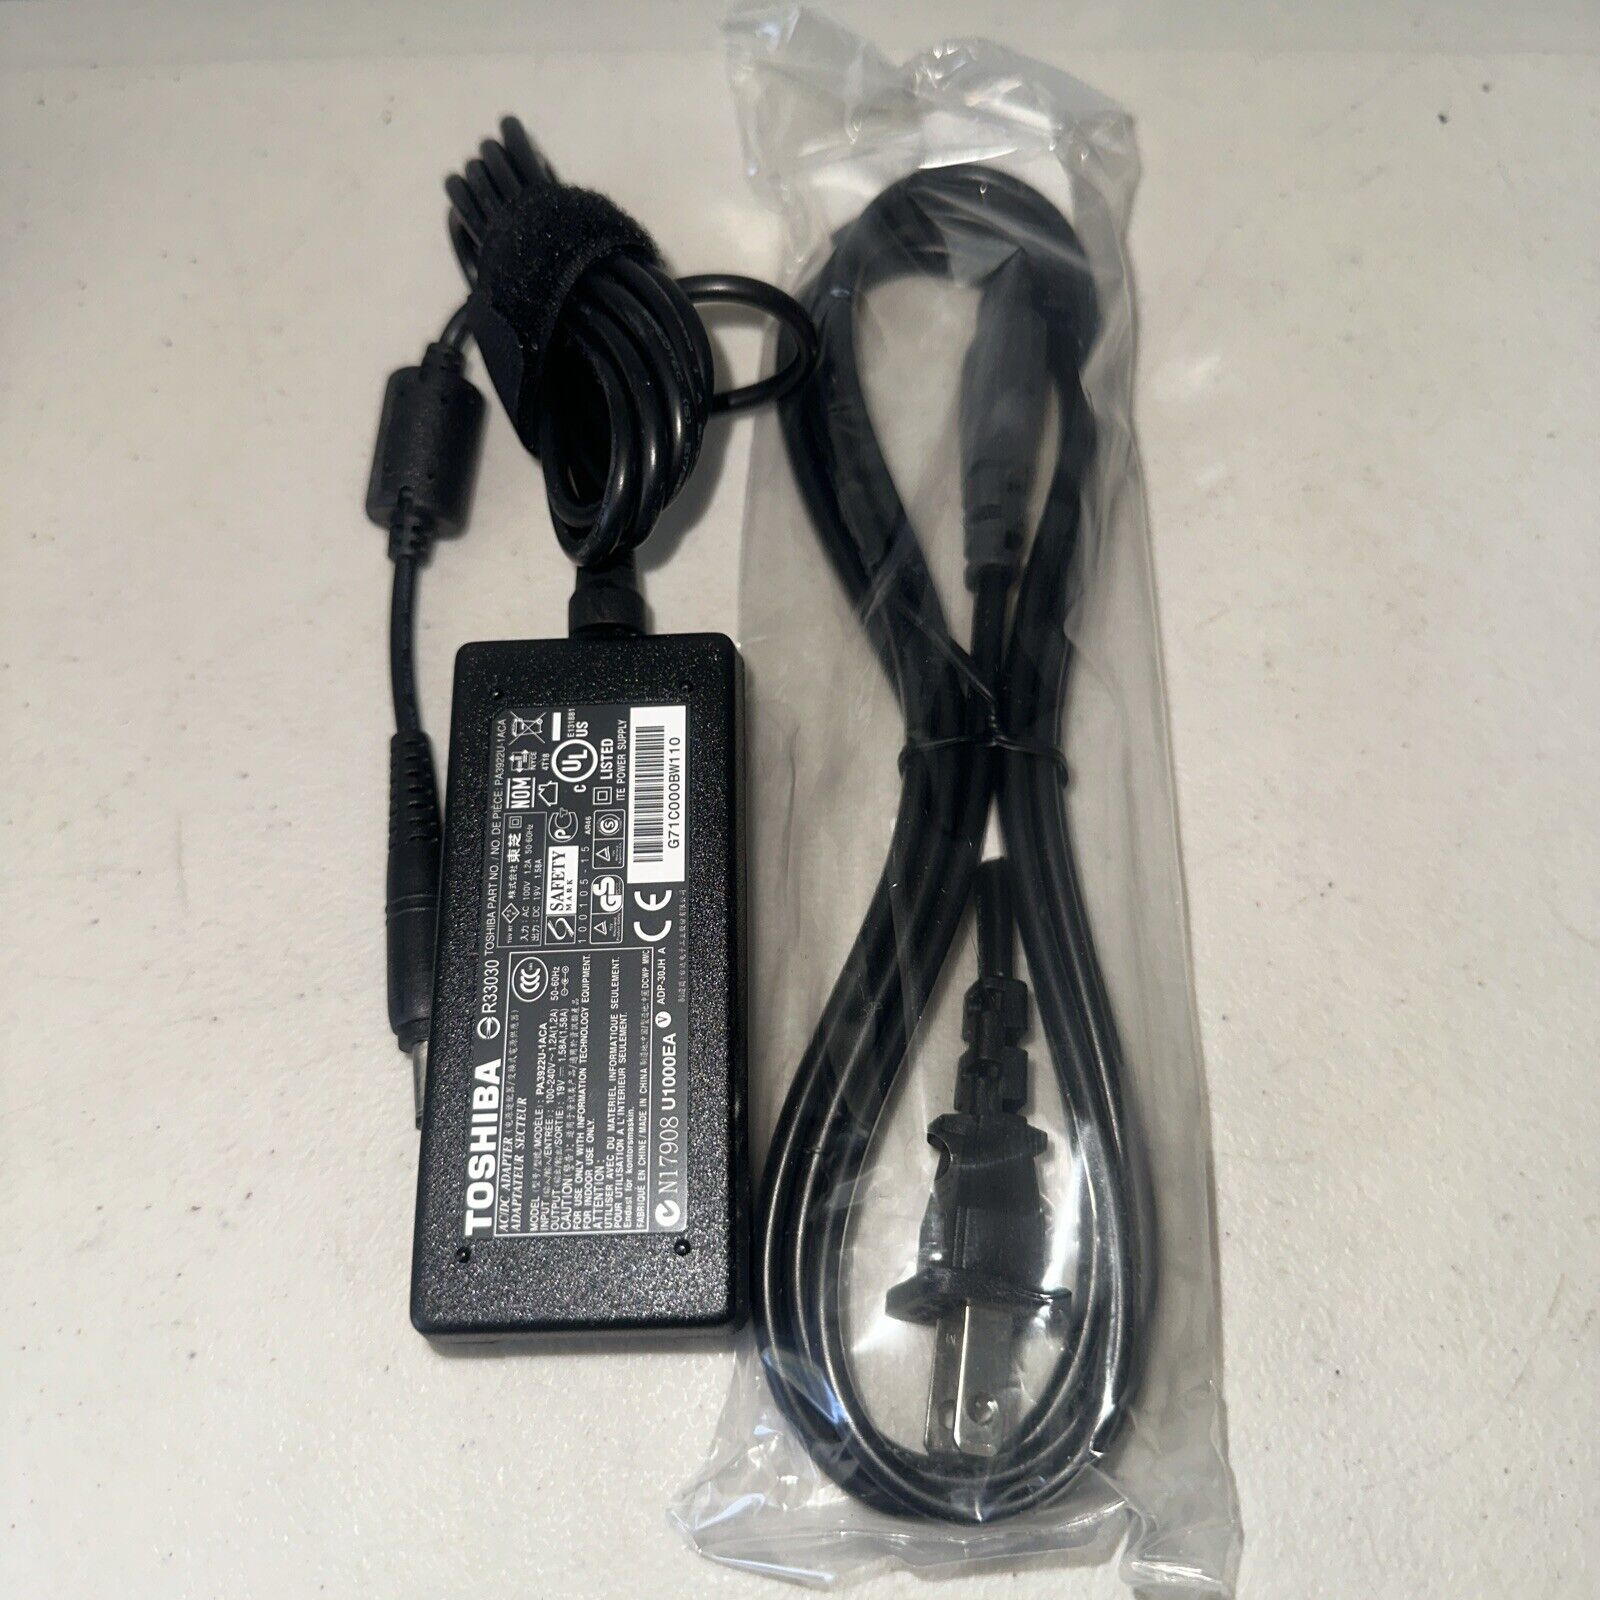 AC Adapter Power Cord Battery Charger For Toshiba Thrive Tablet PA3922U-1ARA